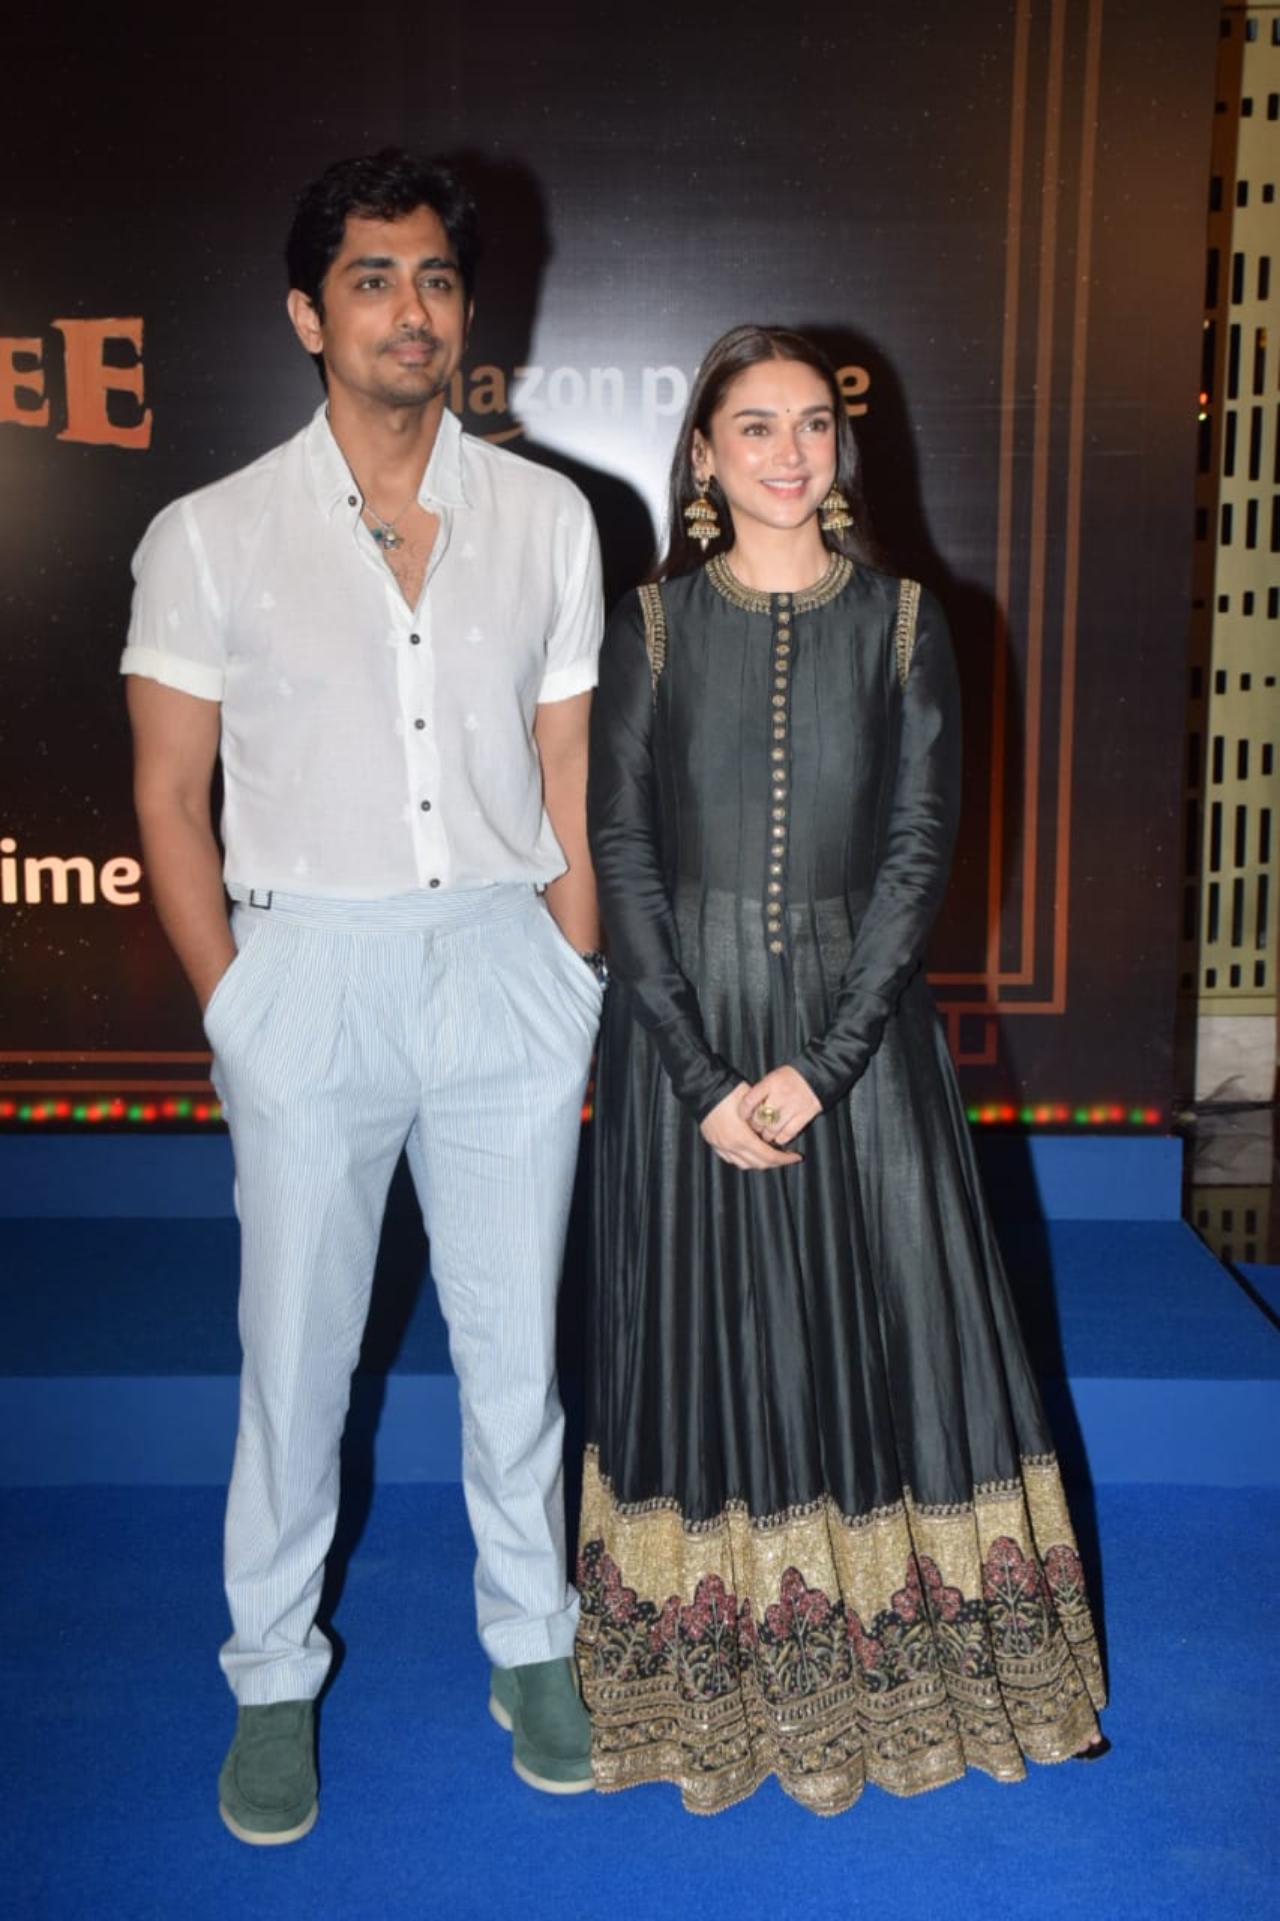 Aditi Rao Hydari arrived with rumoured boyfriend actor Siddharth. The two recently went viral after they posted a dancing reel together